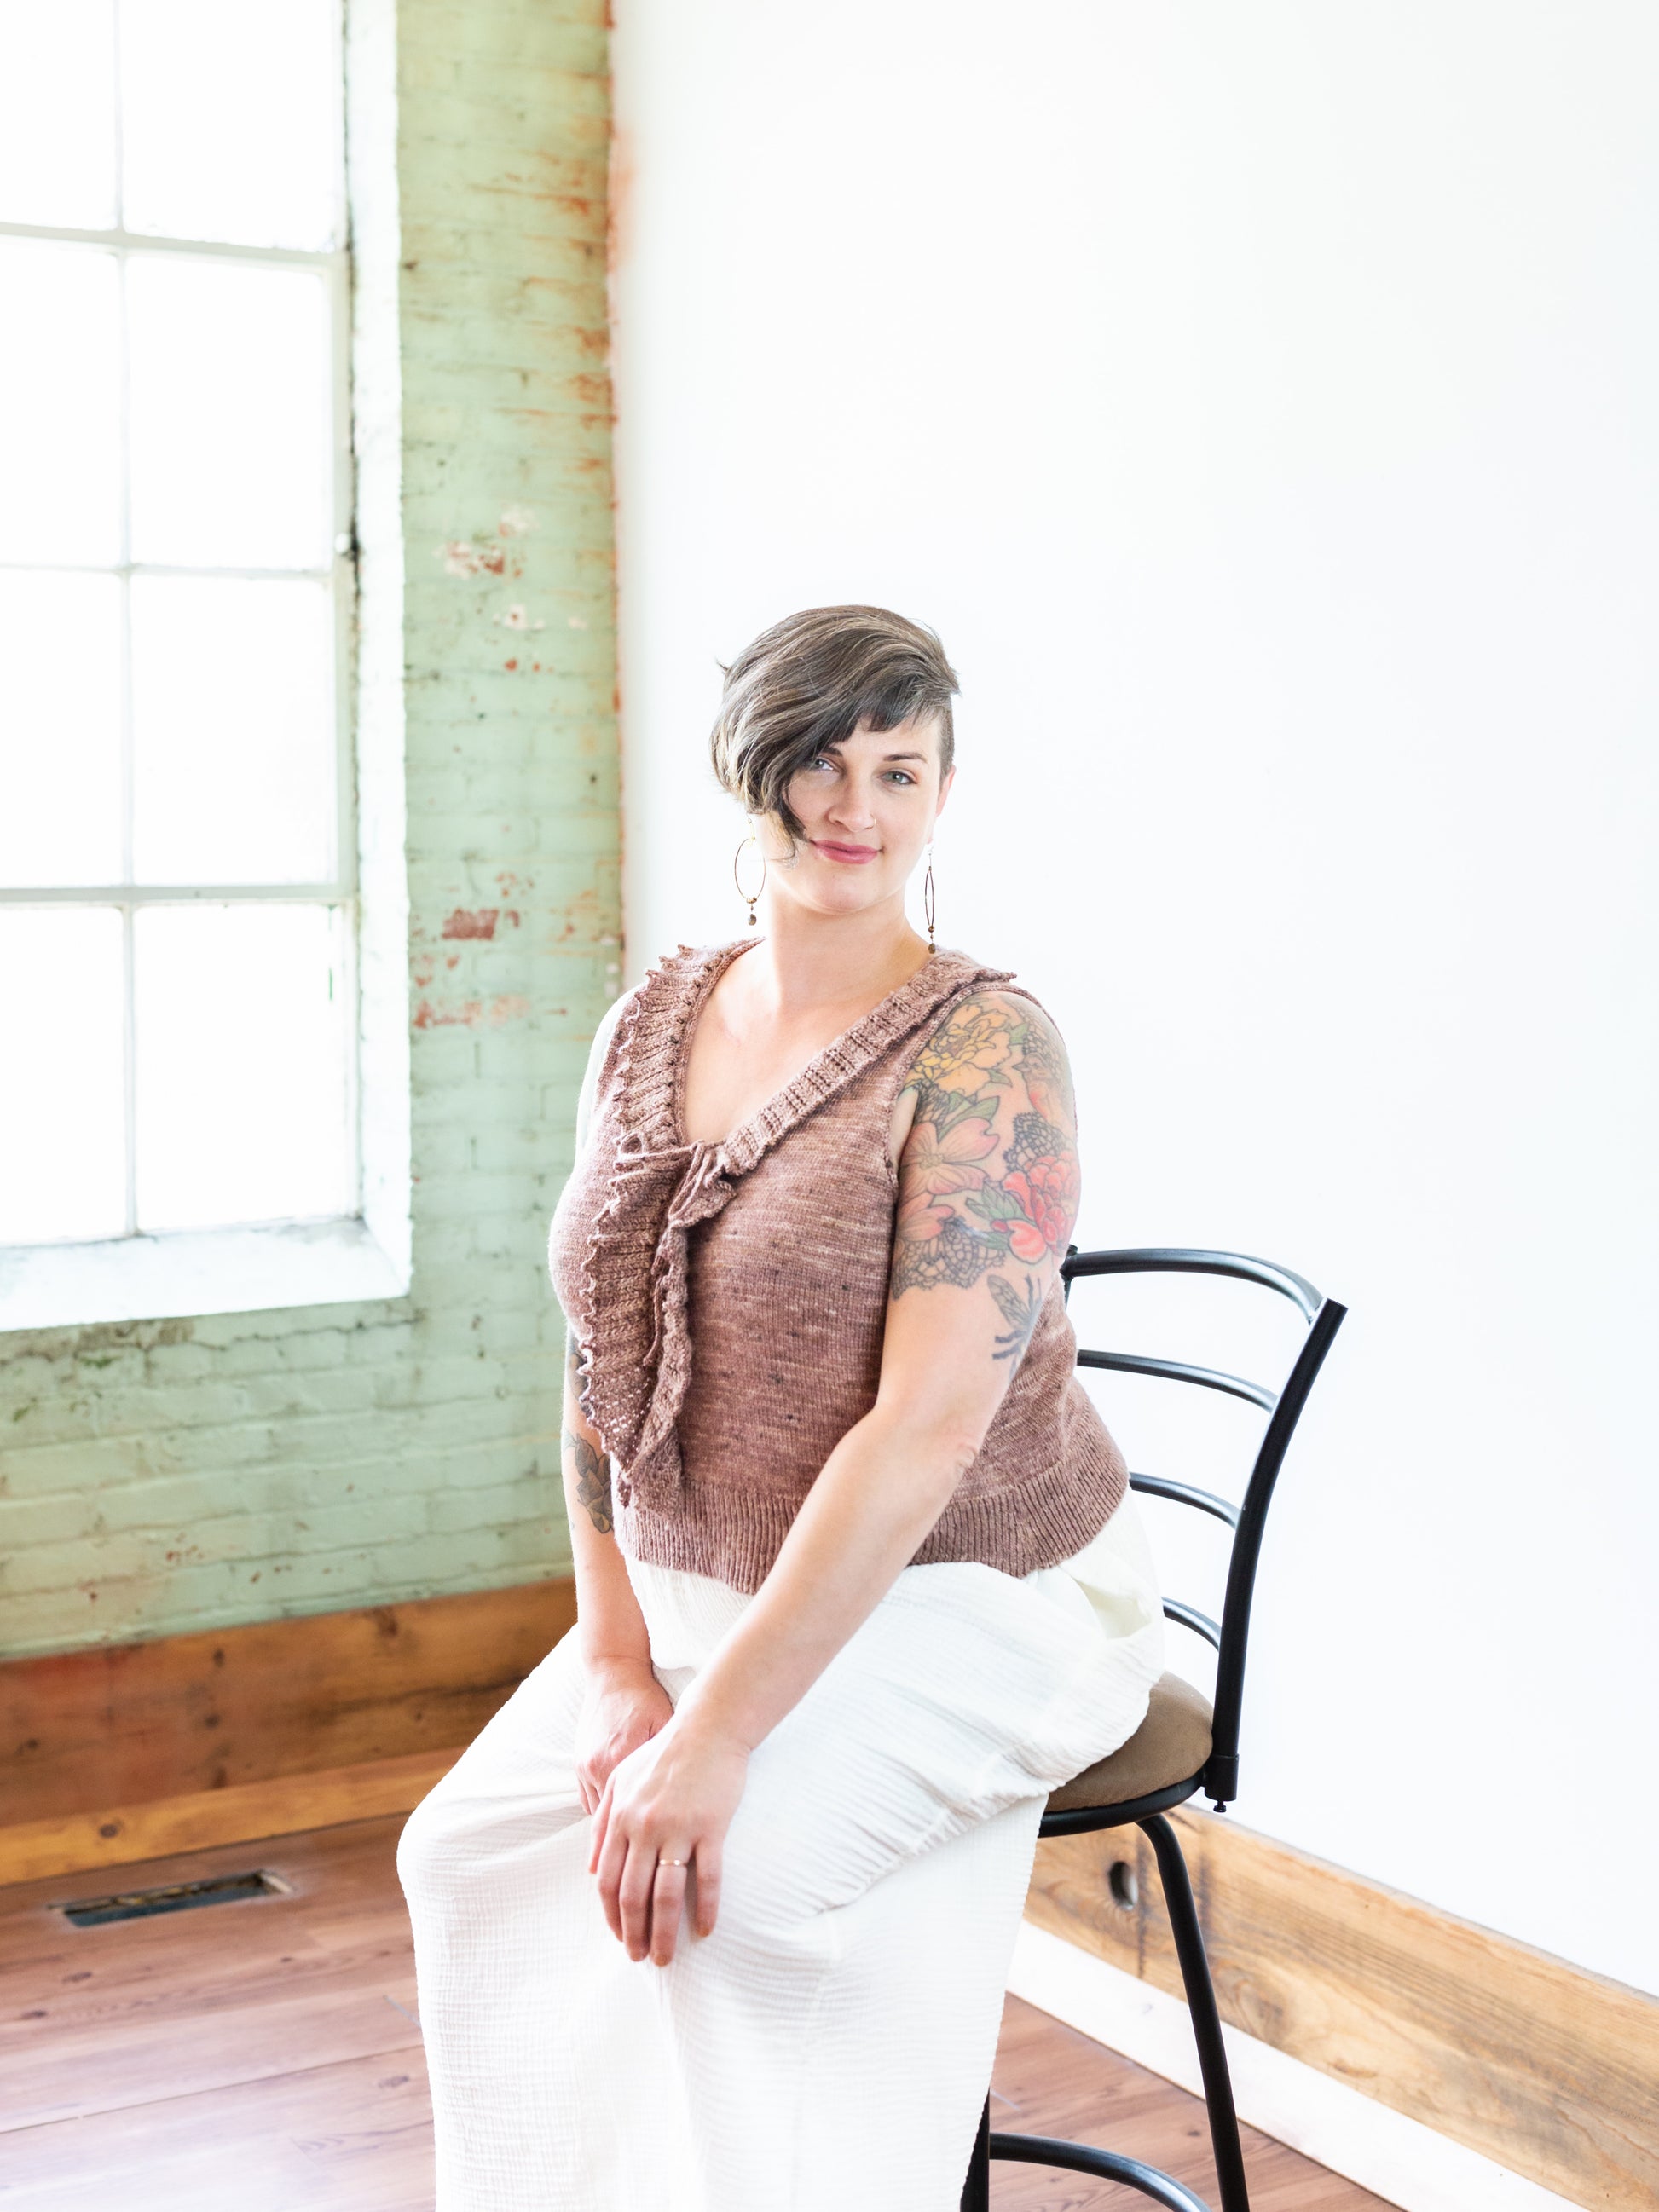 Jen sits on a chair, smiling at a camera, in a pair of white pants and a pink, hand knit tank top. The top has a ruffled lace collar.